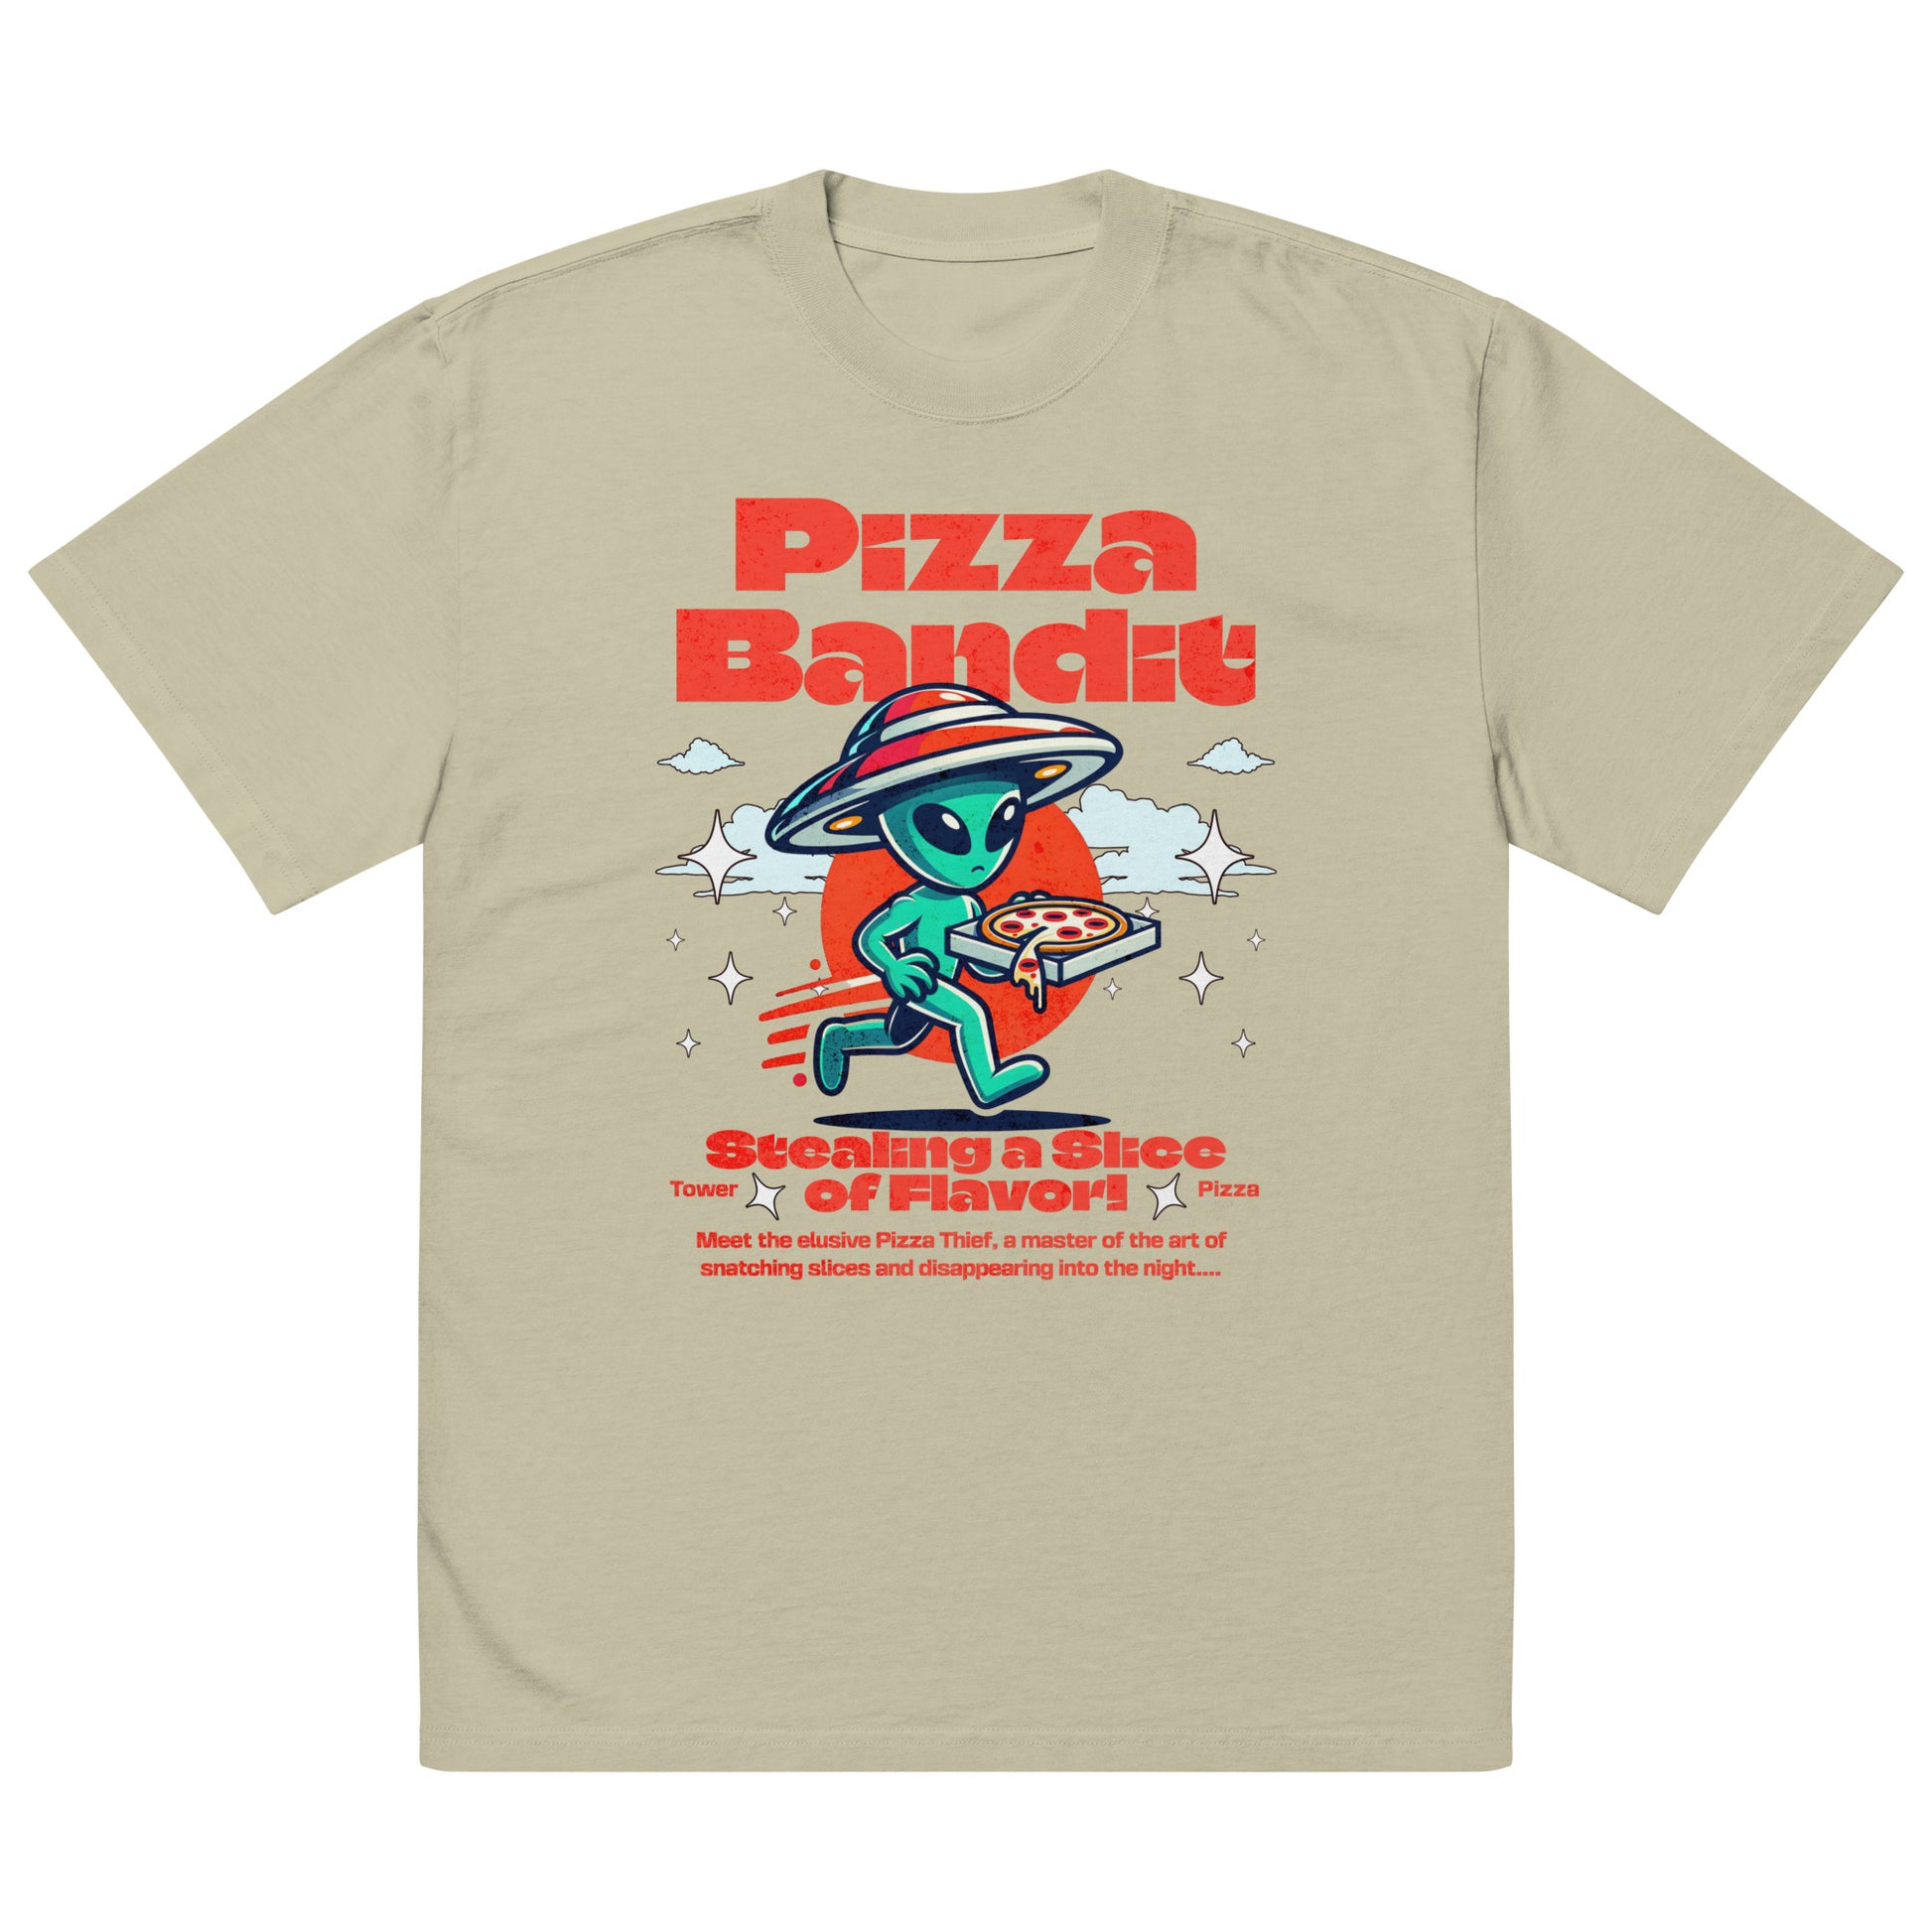 Pizza Bandit Premium Oversized faded t-shirt - Tower Pizza Gift Shop